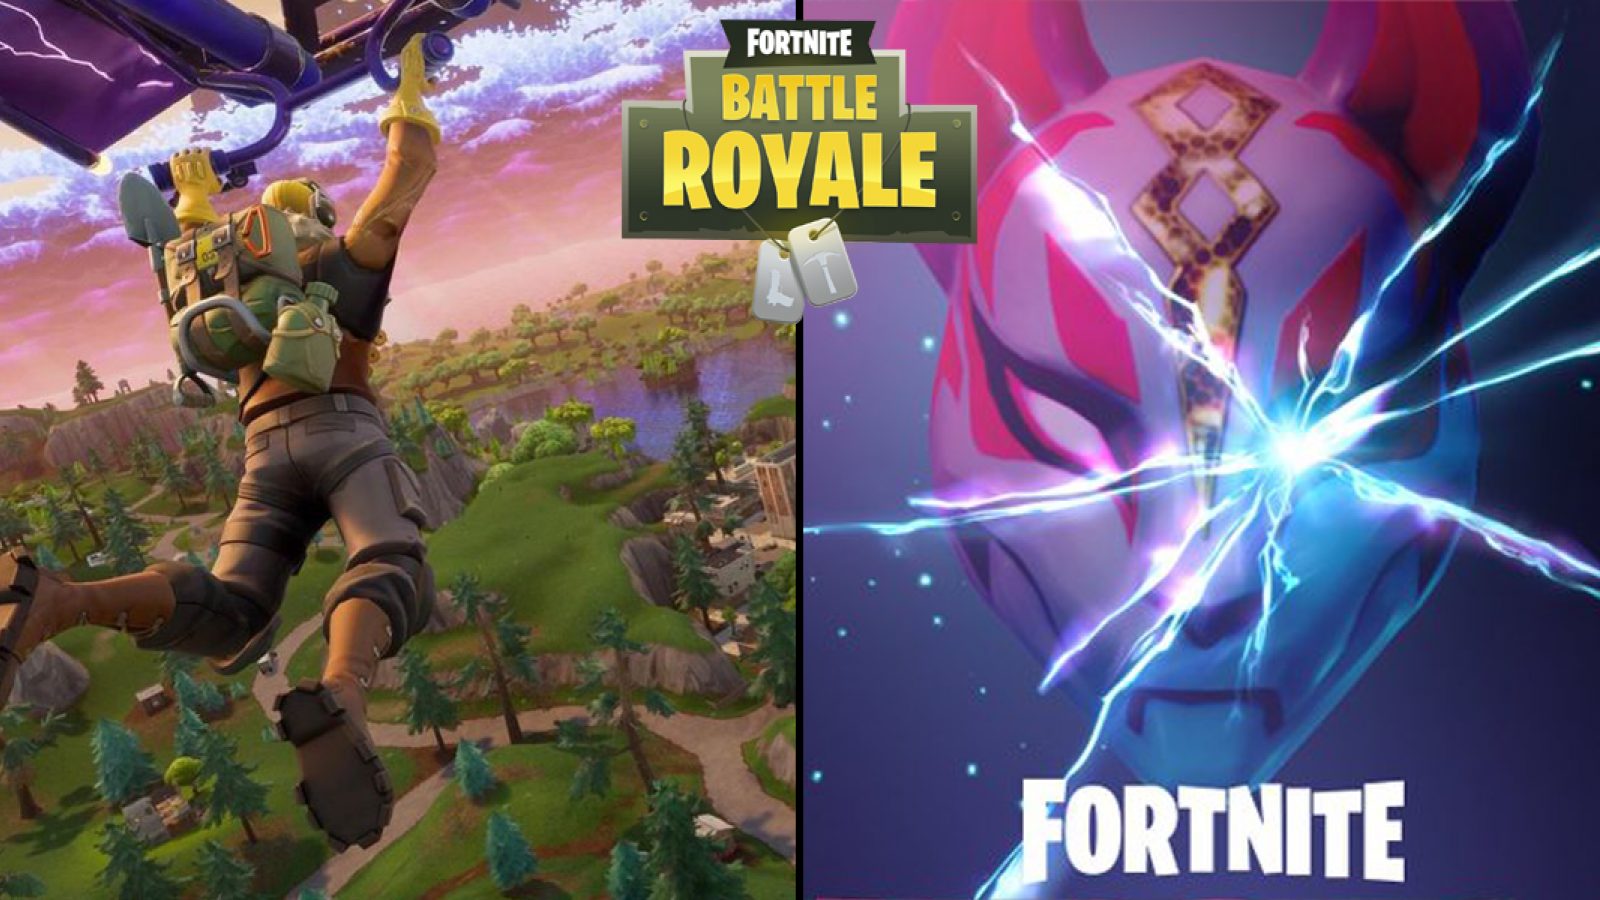 The First Fortnite Battle Royale Season 5 Teaser Image Has Been ...